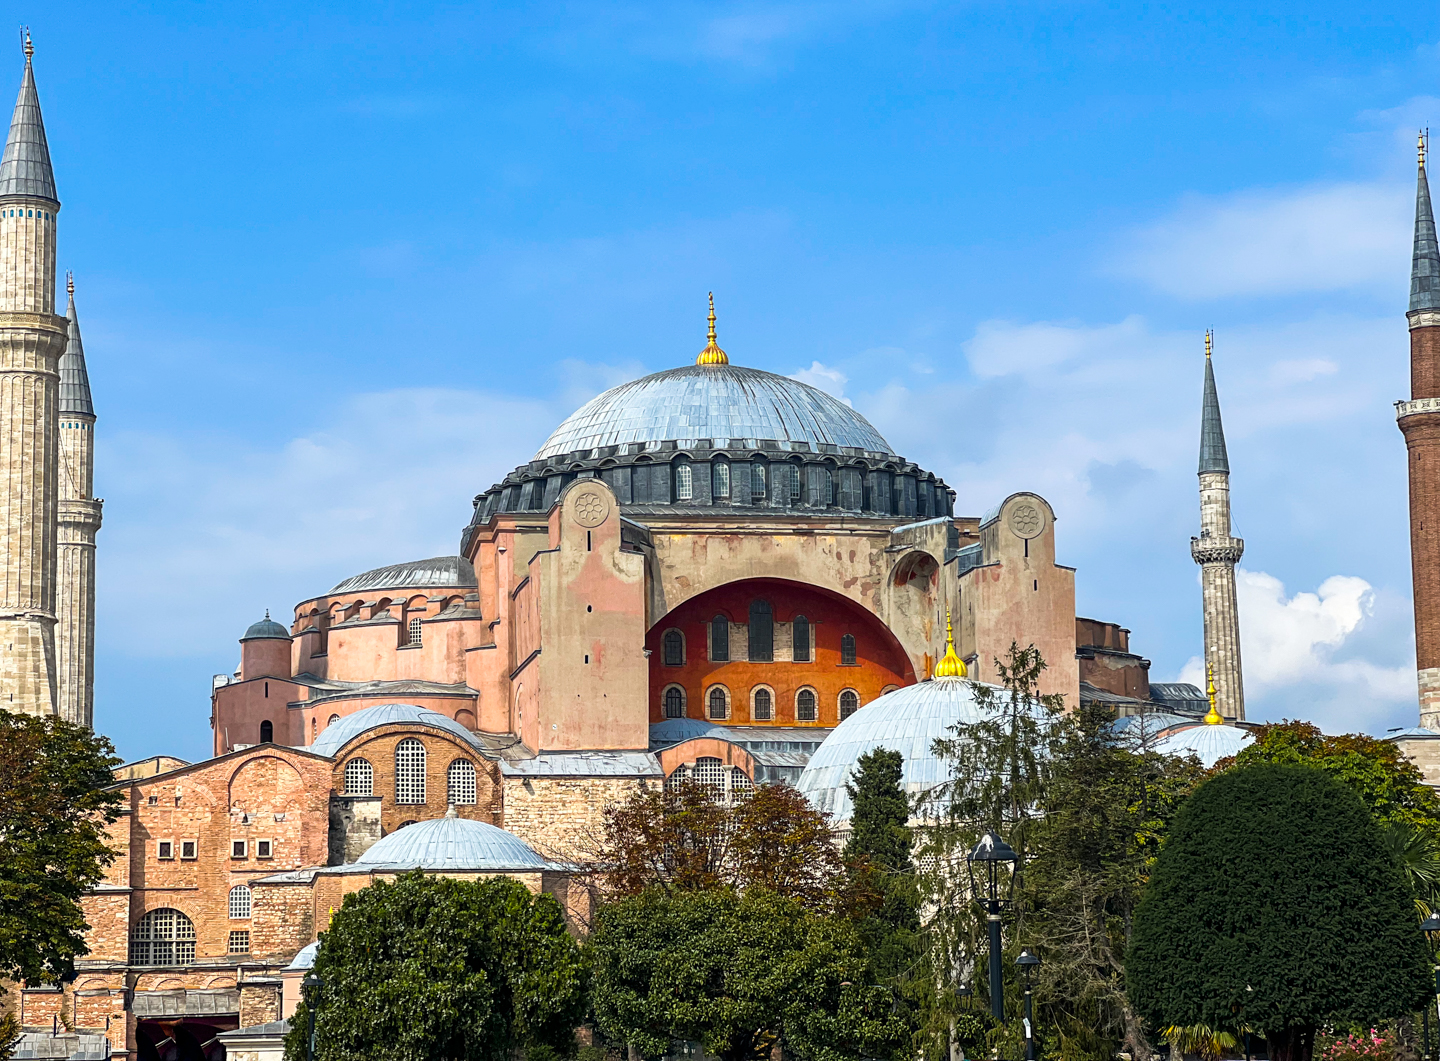 The Hagia Sophia is a must-visit sight in Turkey